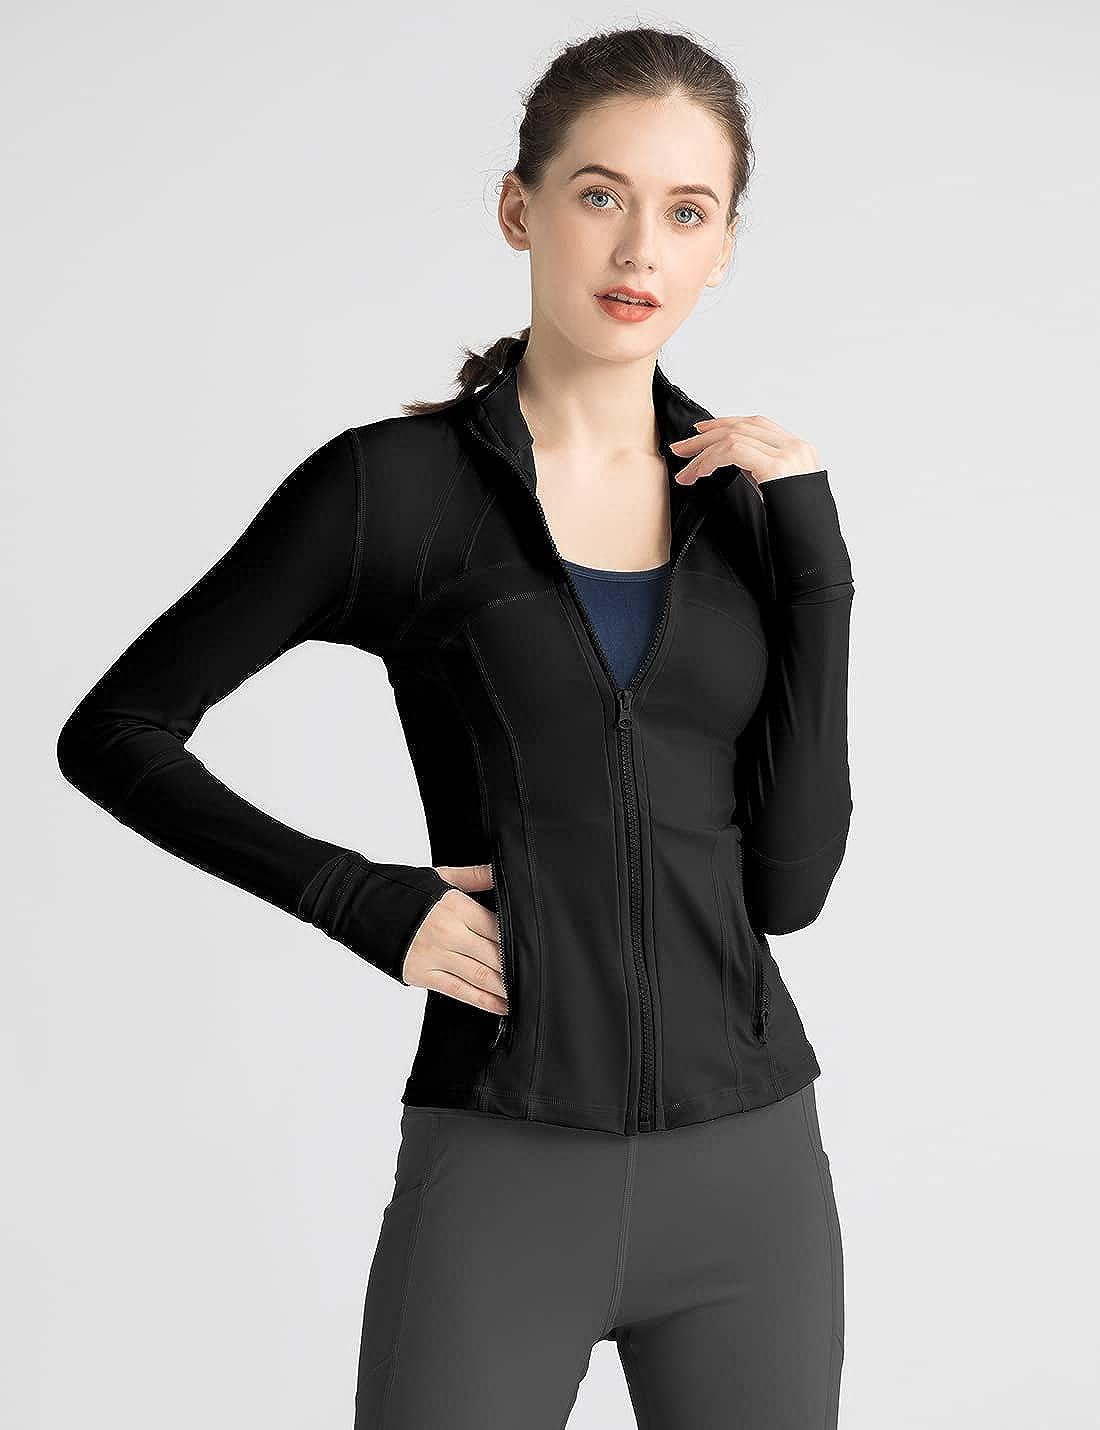 G Gradual Women's Cropped Workout Jacket Slim Fit Full Zip Athletic Running  Gym Jackets for Women with Thumb Holes Pockets(Black,XS) at  Women's  Clothing store